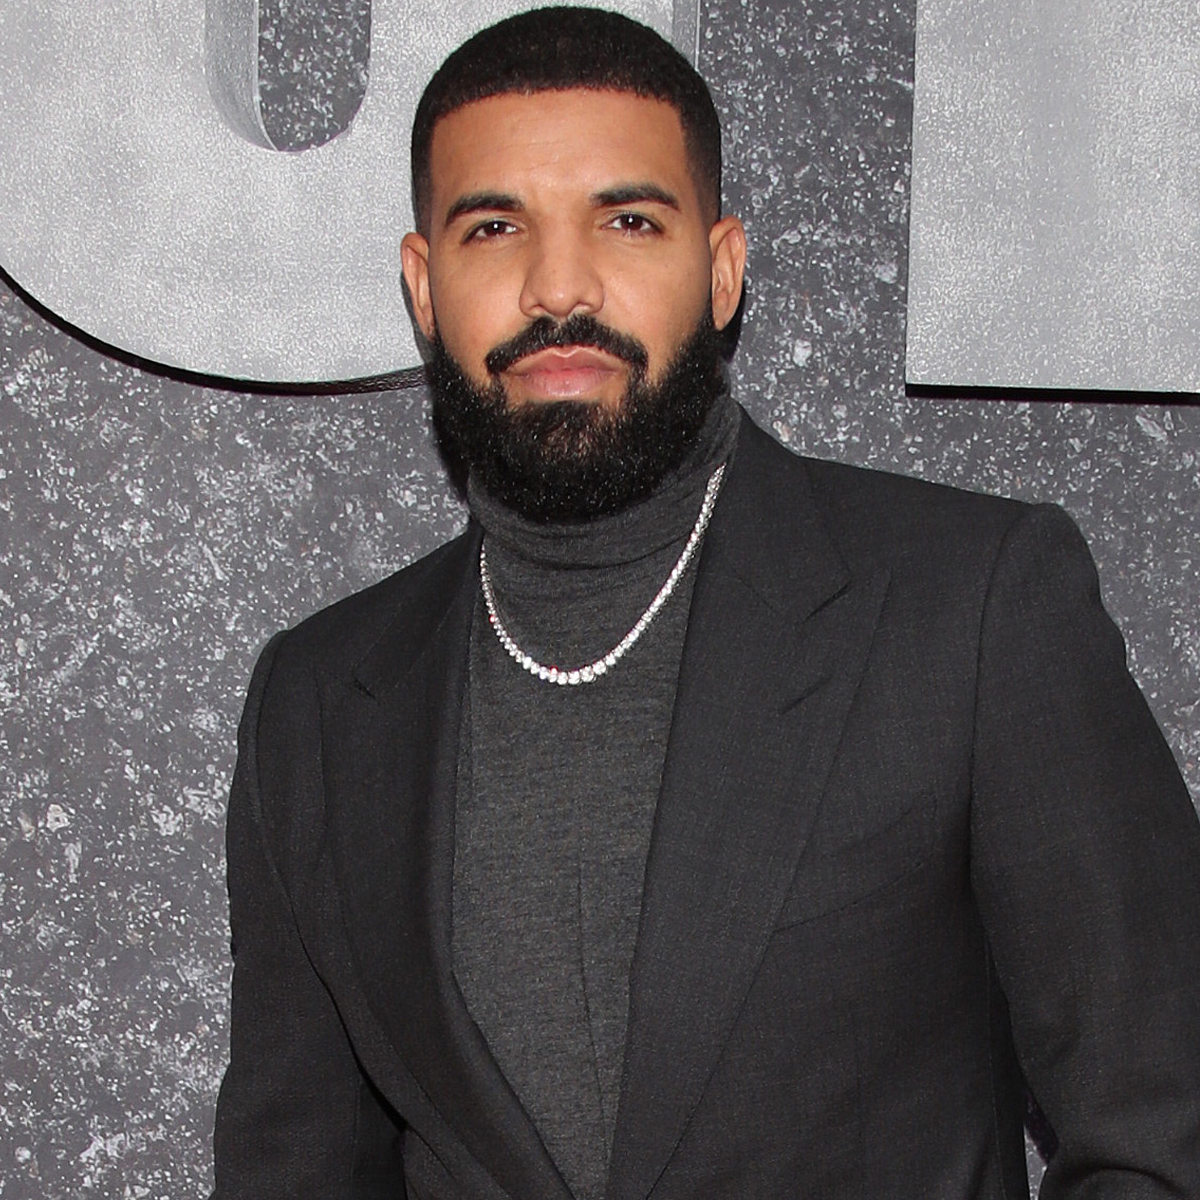 Drake Debuts Braided Hairstyle in New Photos - E! Online